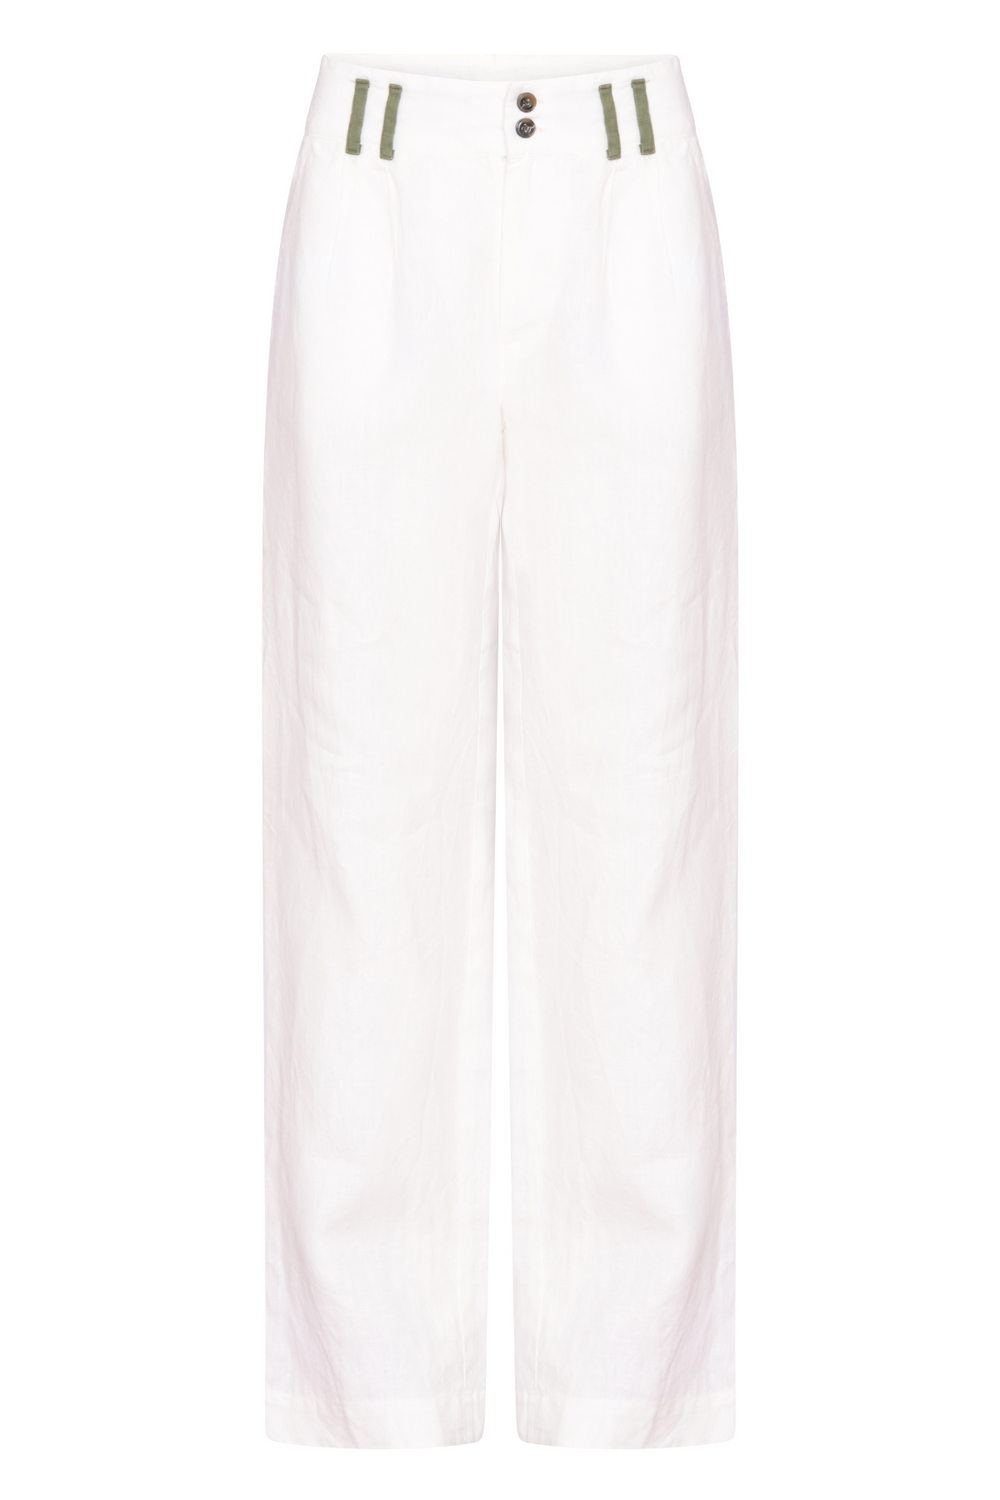 White pure linen trousers with khaki detailing, worn in London